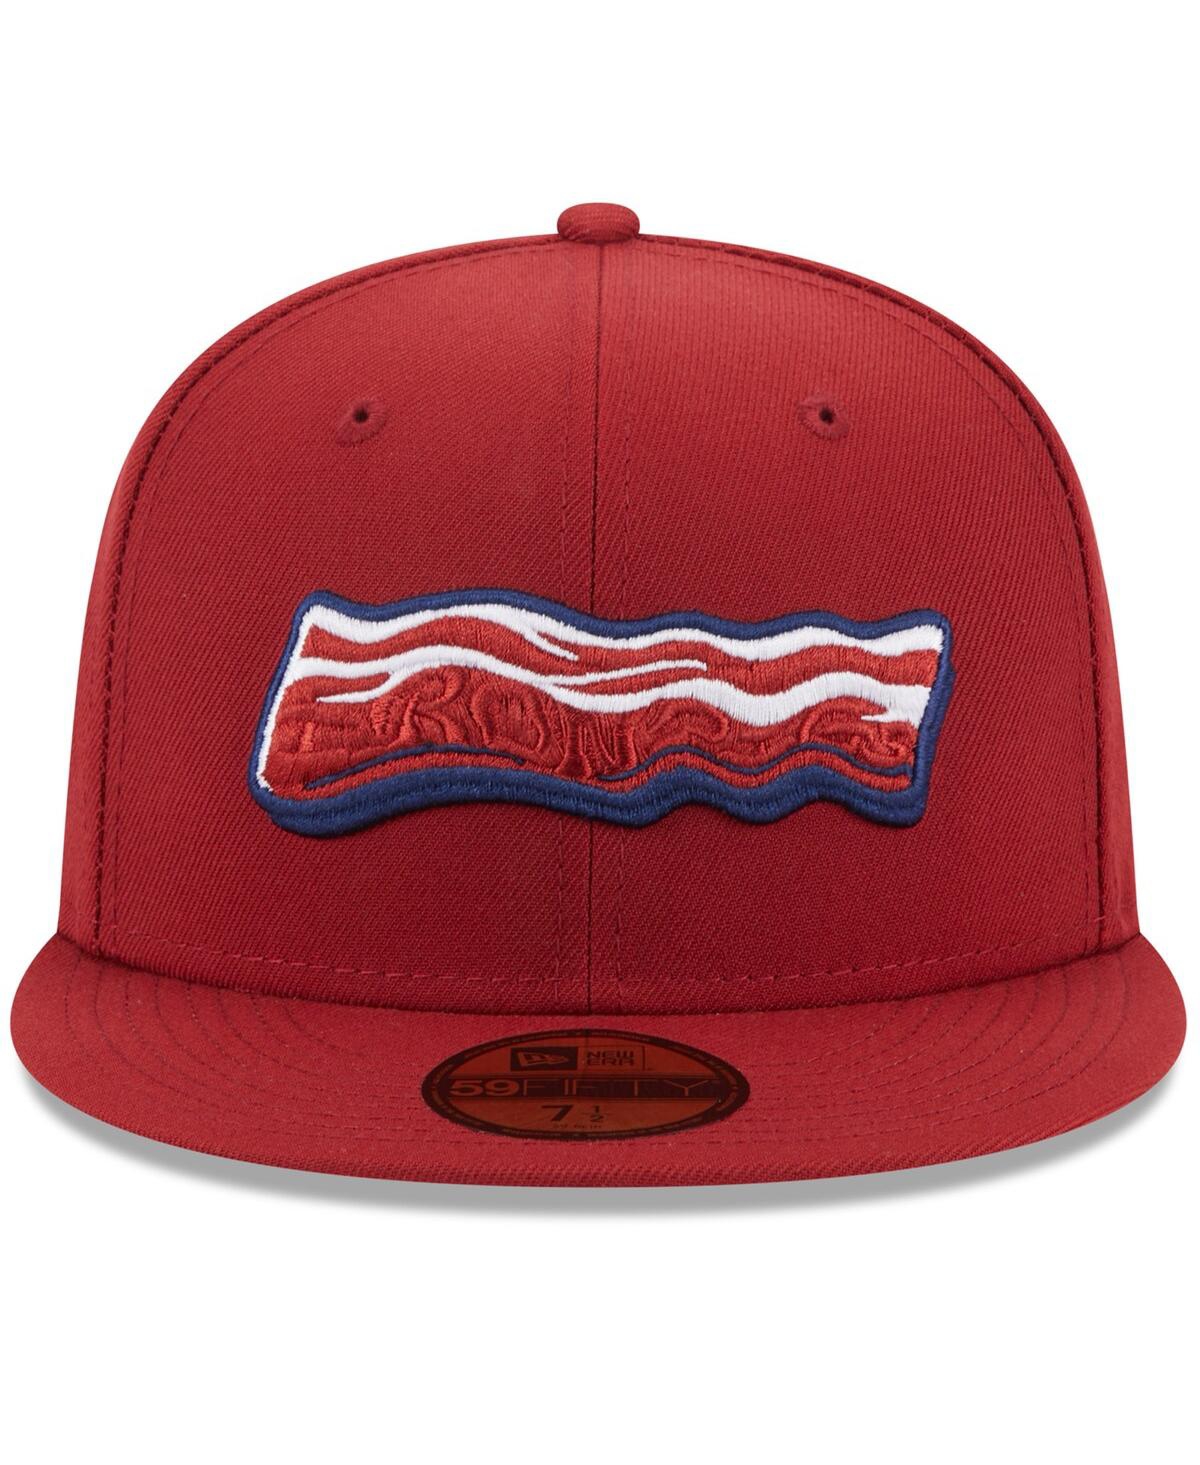 Shop New Era Men's  Red Lehigh Valley Ironpigs Authentic Collection Alternate Logo 59fifty Fitted Hat